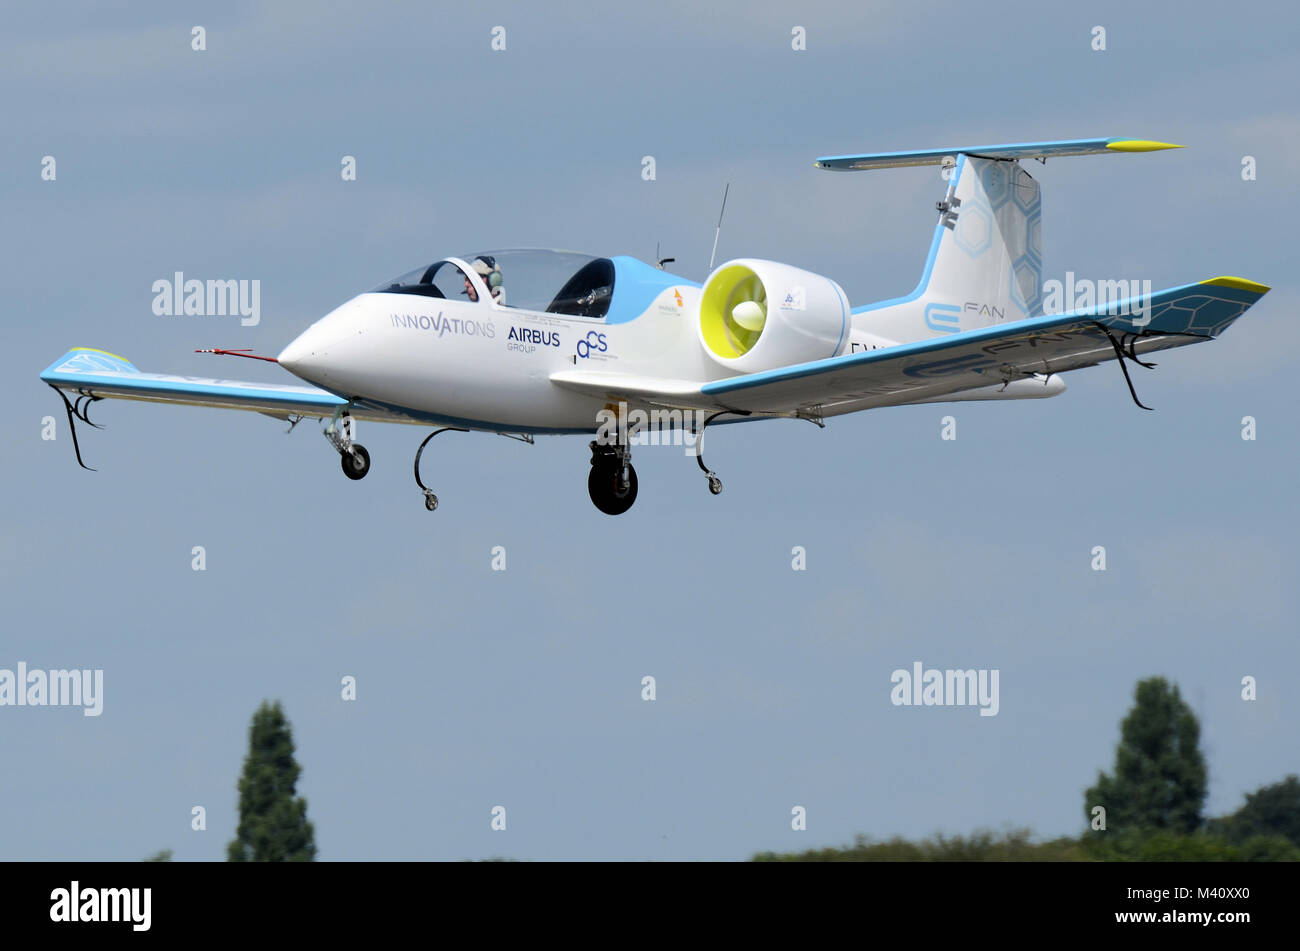 Airbus E-Fan, prototype two-seat electric aircraft being developed by ...